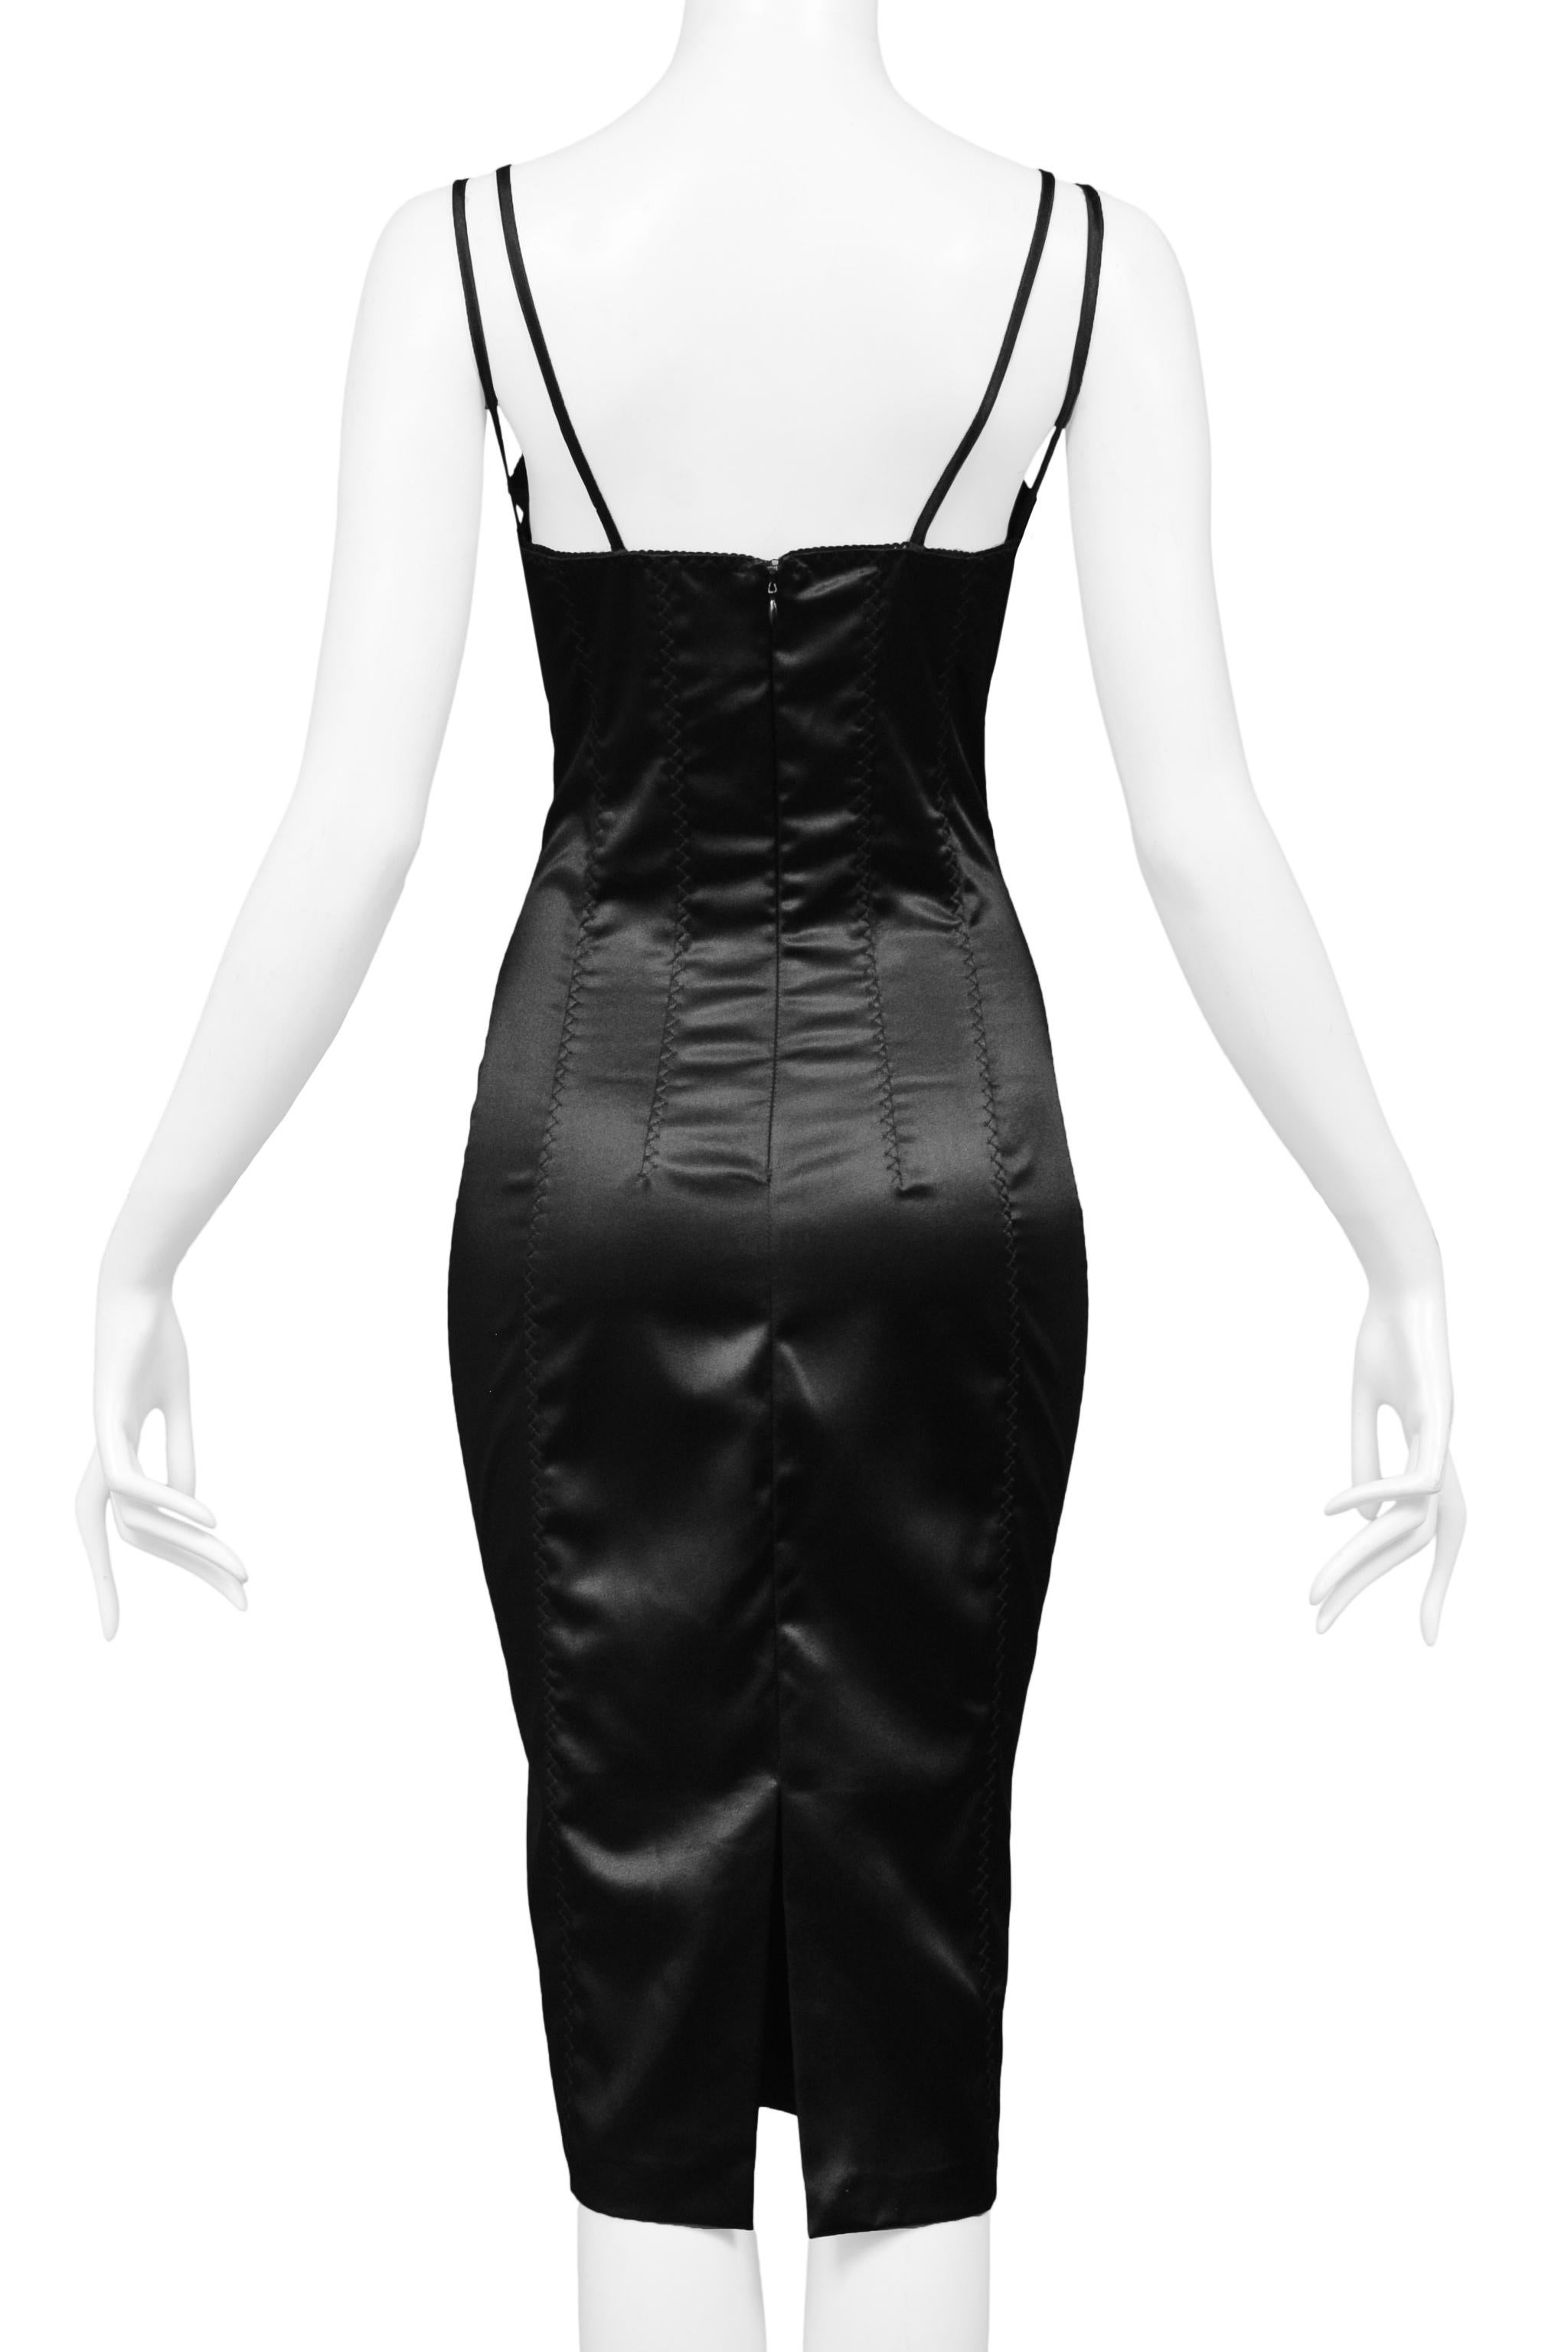 Women's Dolce & Gabbana Black Satin Bodycon Dress with Lace Insets